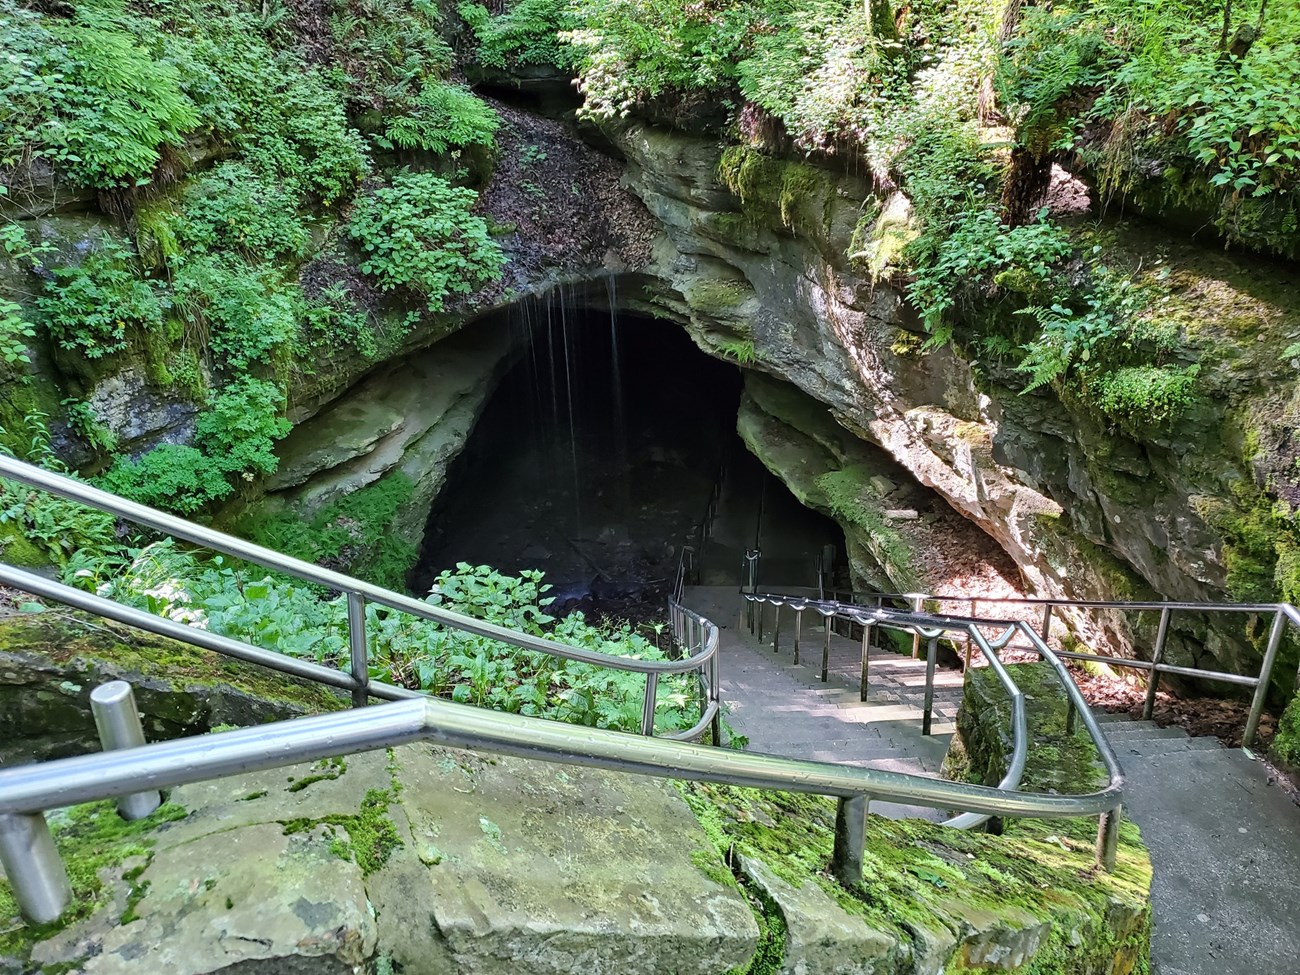 A double staircase, with metal handrails on the sides and middle, leads into a dark cave opening framed by plant-covered rocks dripping with water.